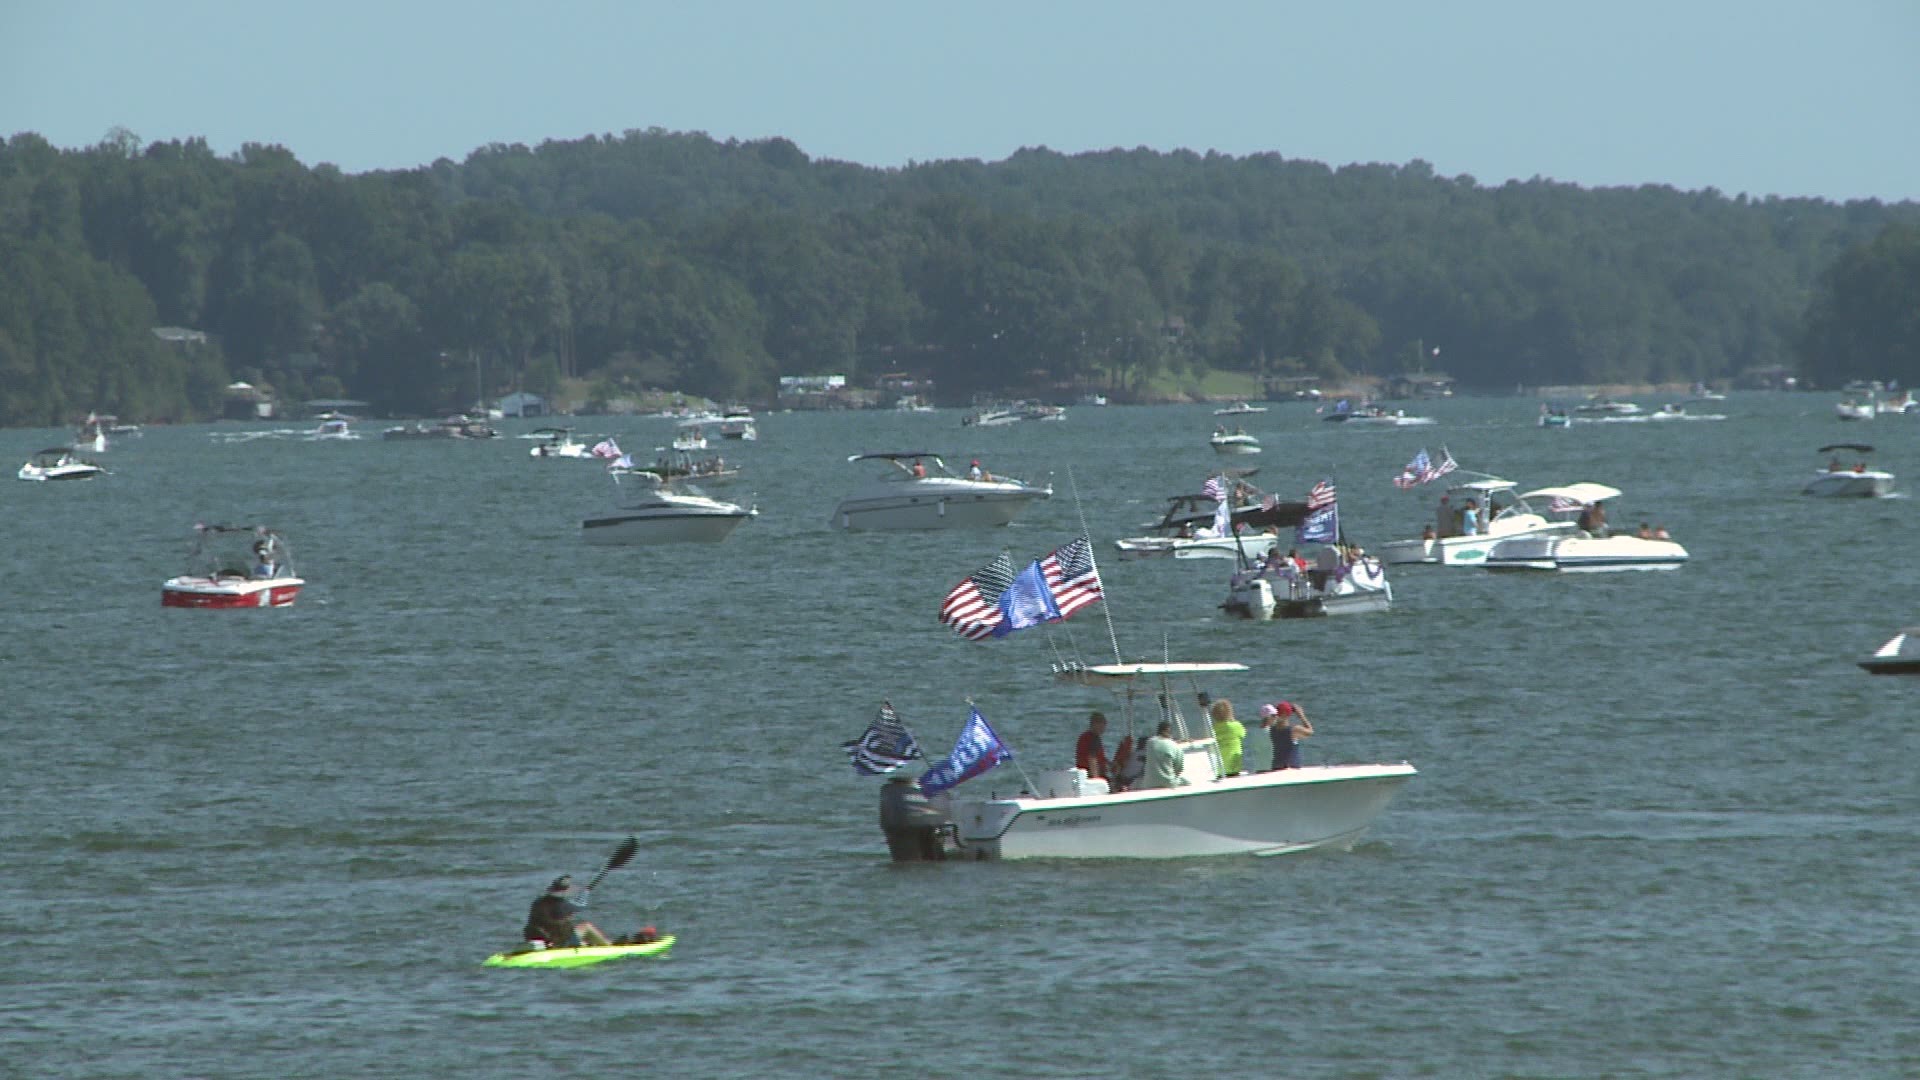 Organizers anticipated roughly 700 boats would participate, however, the Georgia Department of Natural Resources says nearly 4,000 showed up.